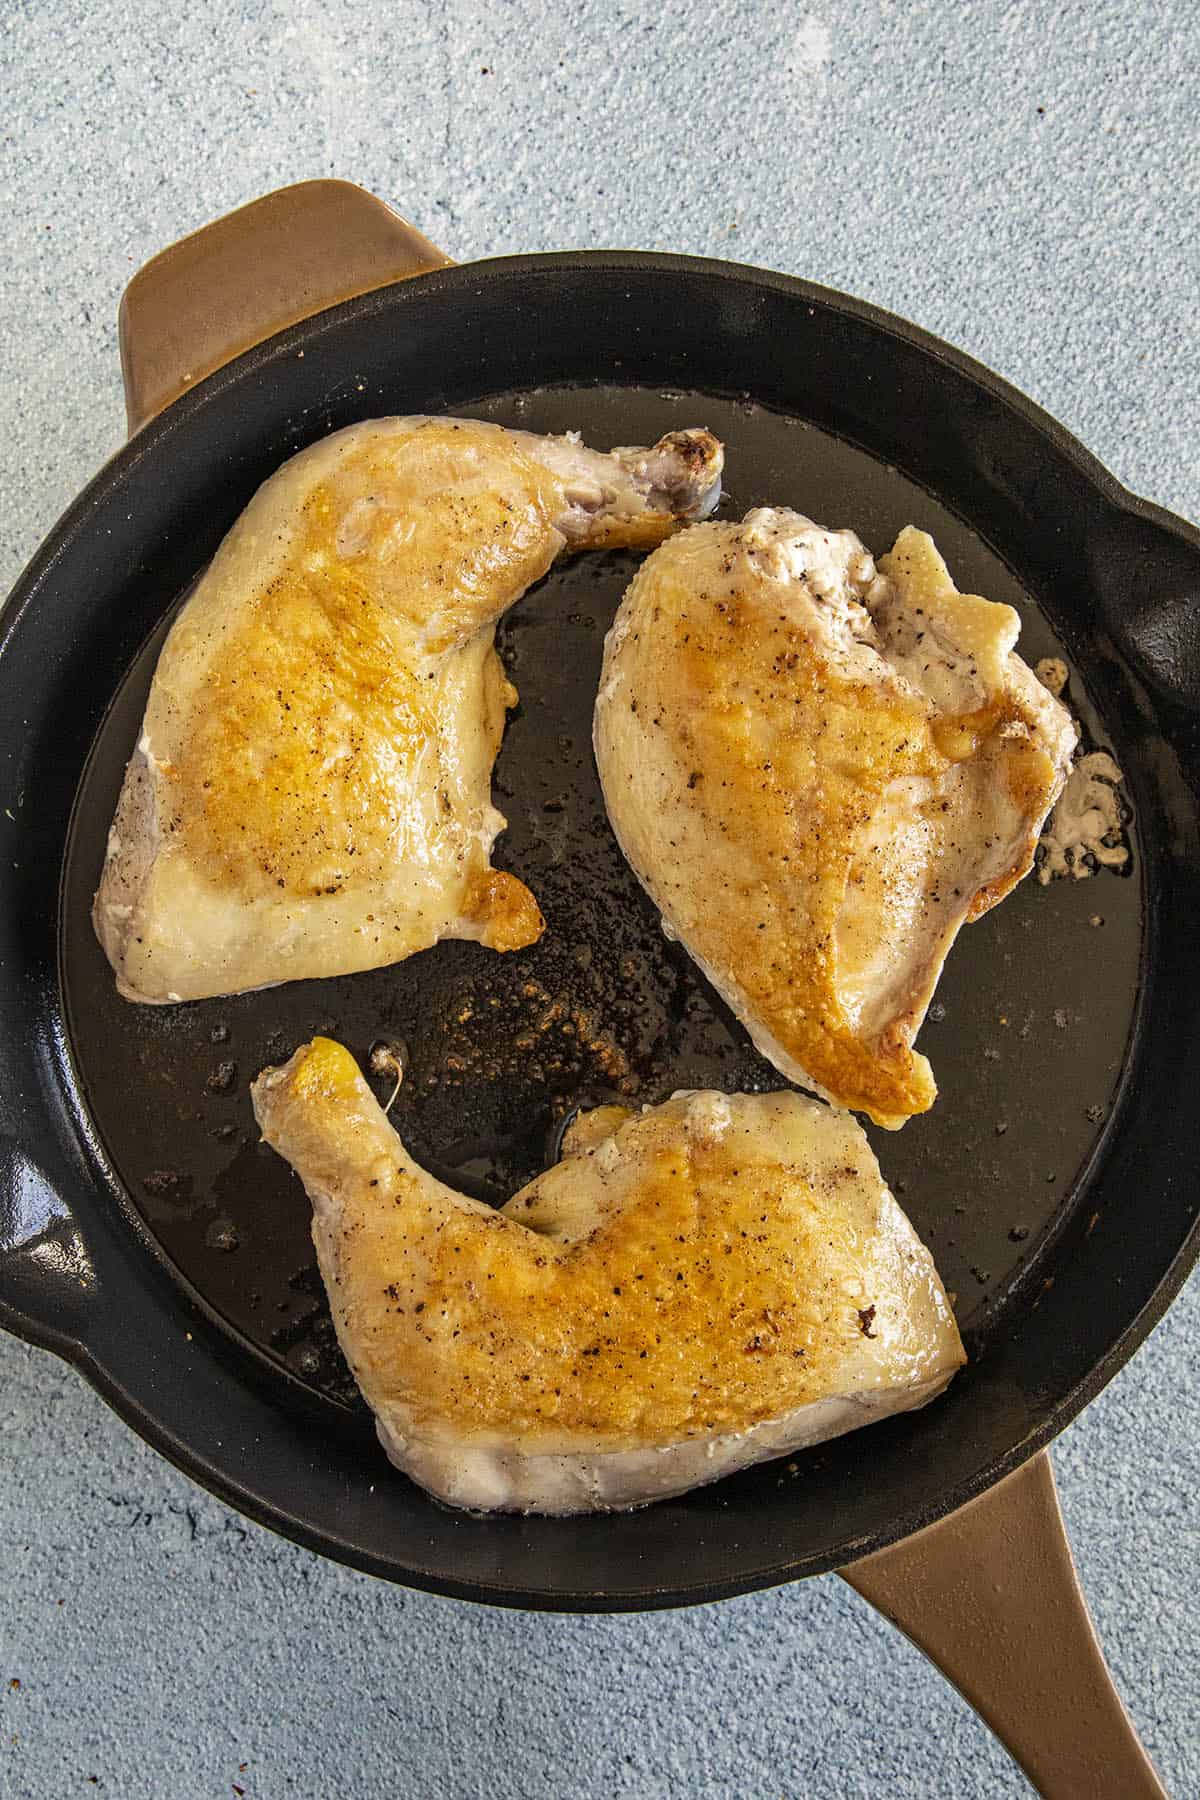 Browning the chicken pieces in a hot pan to make Chicken Cacciatore